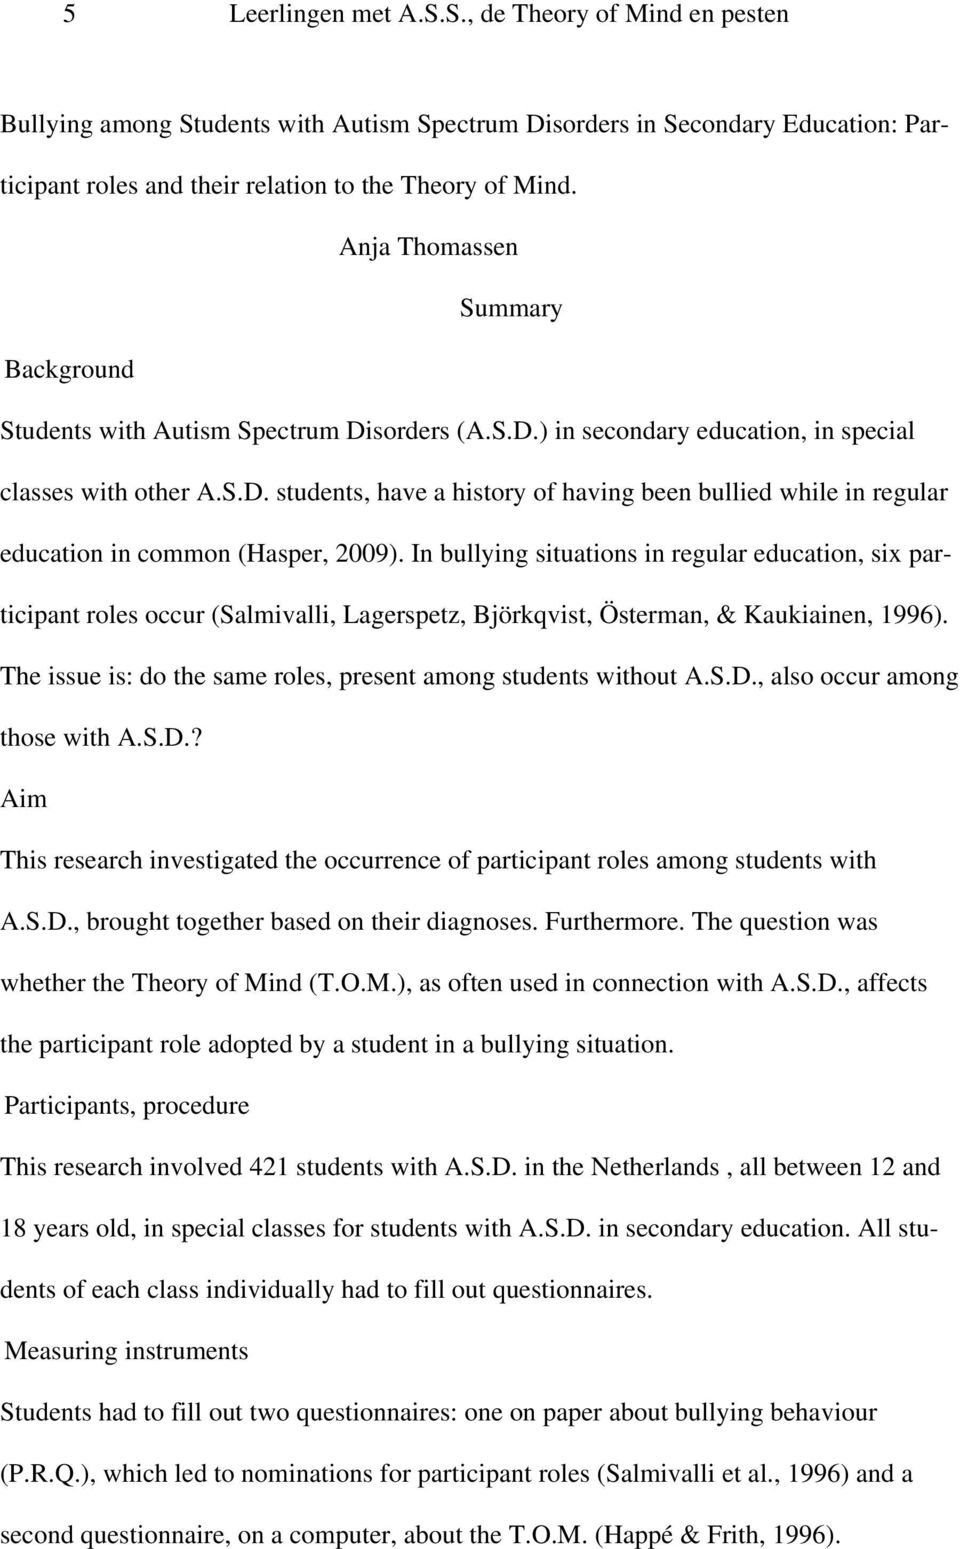 In bullying situations in regular education, six participant roles occur (Salmivalli, Lagerspetz, Björkqvist, Österman, & Kaukiainen, 1996).